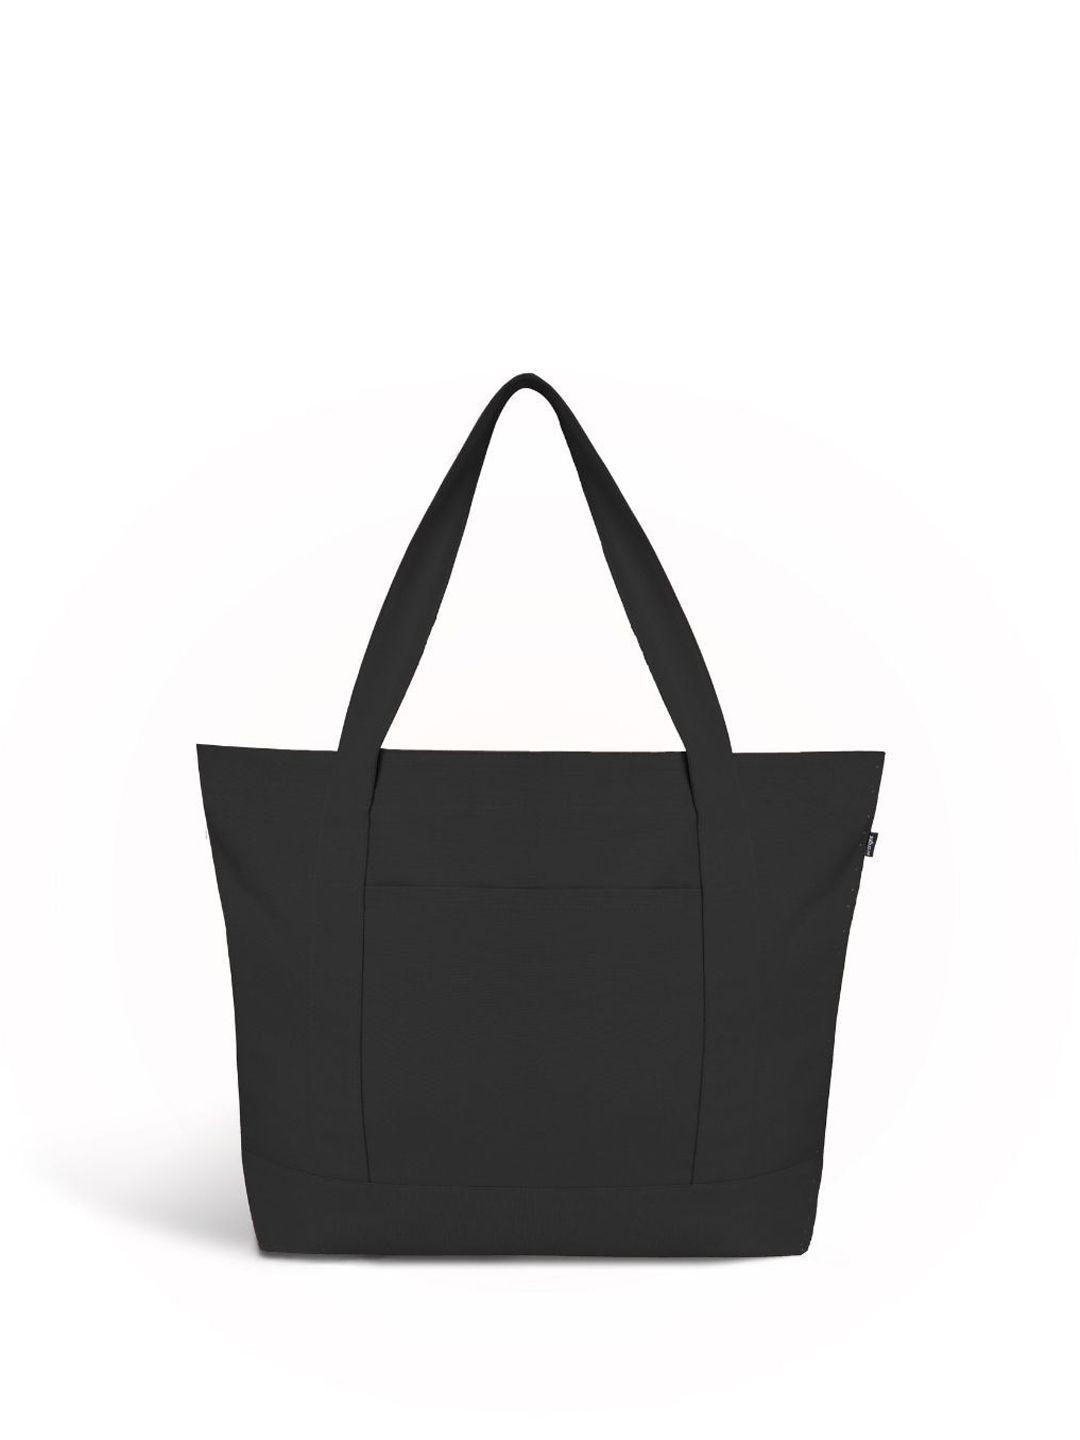 ecoright unisex pure cotton oversized shopper tote bag up to 18 inch